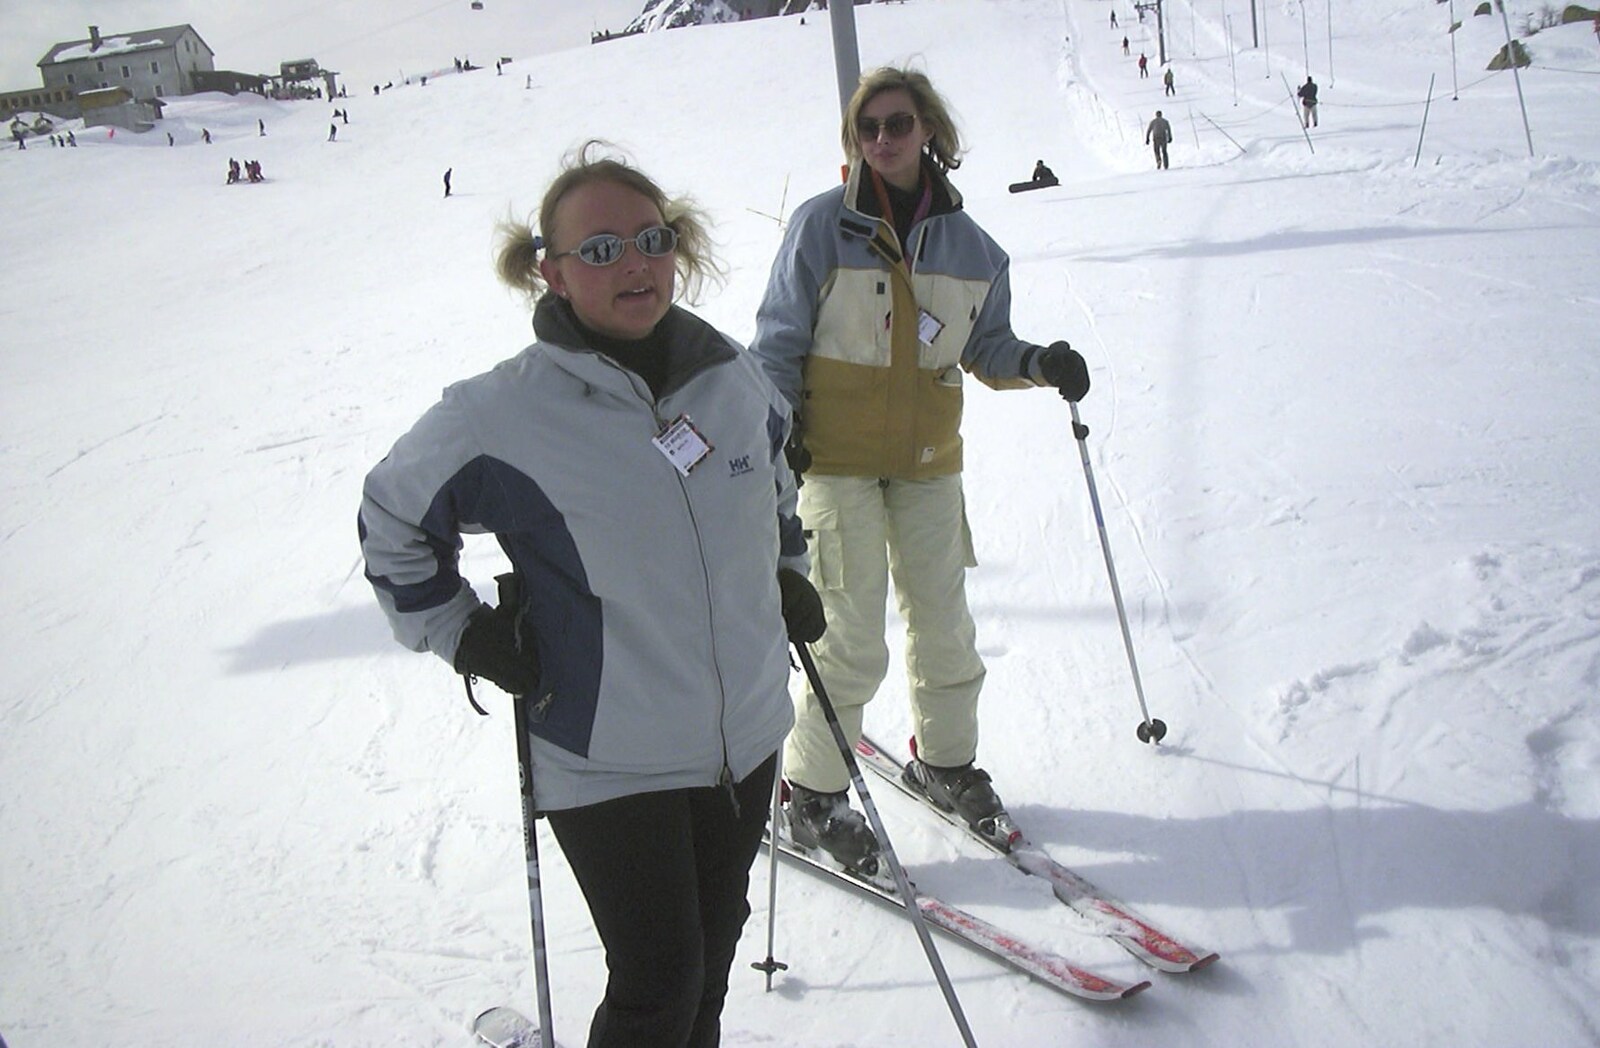 Michelle and Wendy from 3G Lab Goes Skiing In Chamonix, France - 12th March 2002